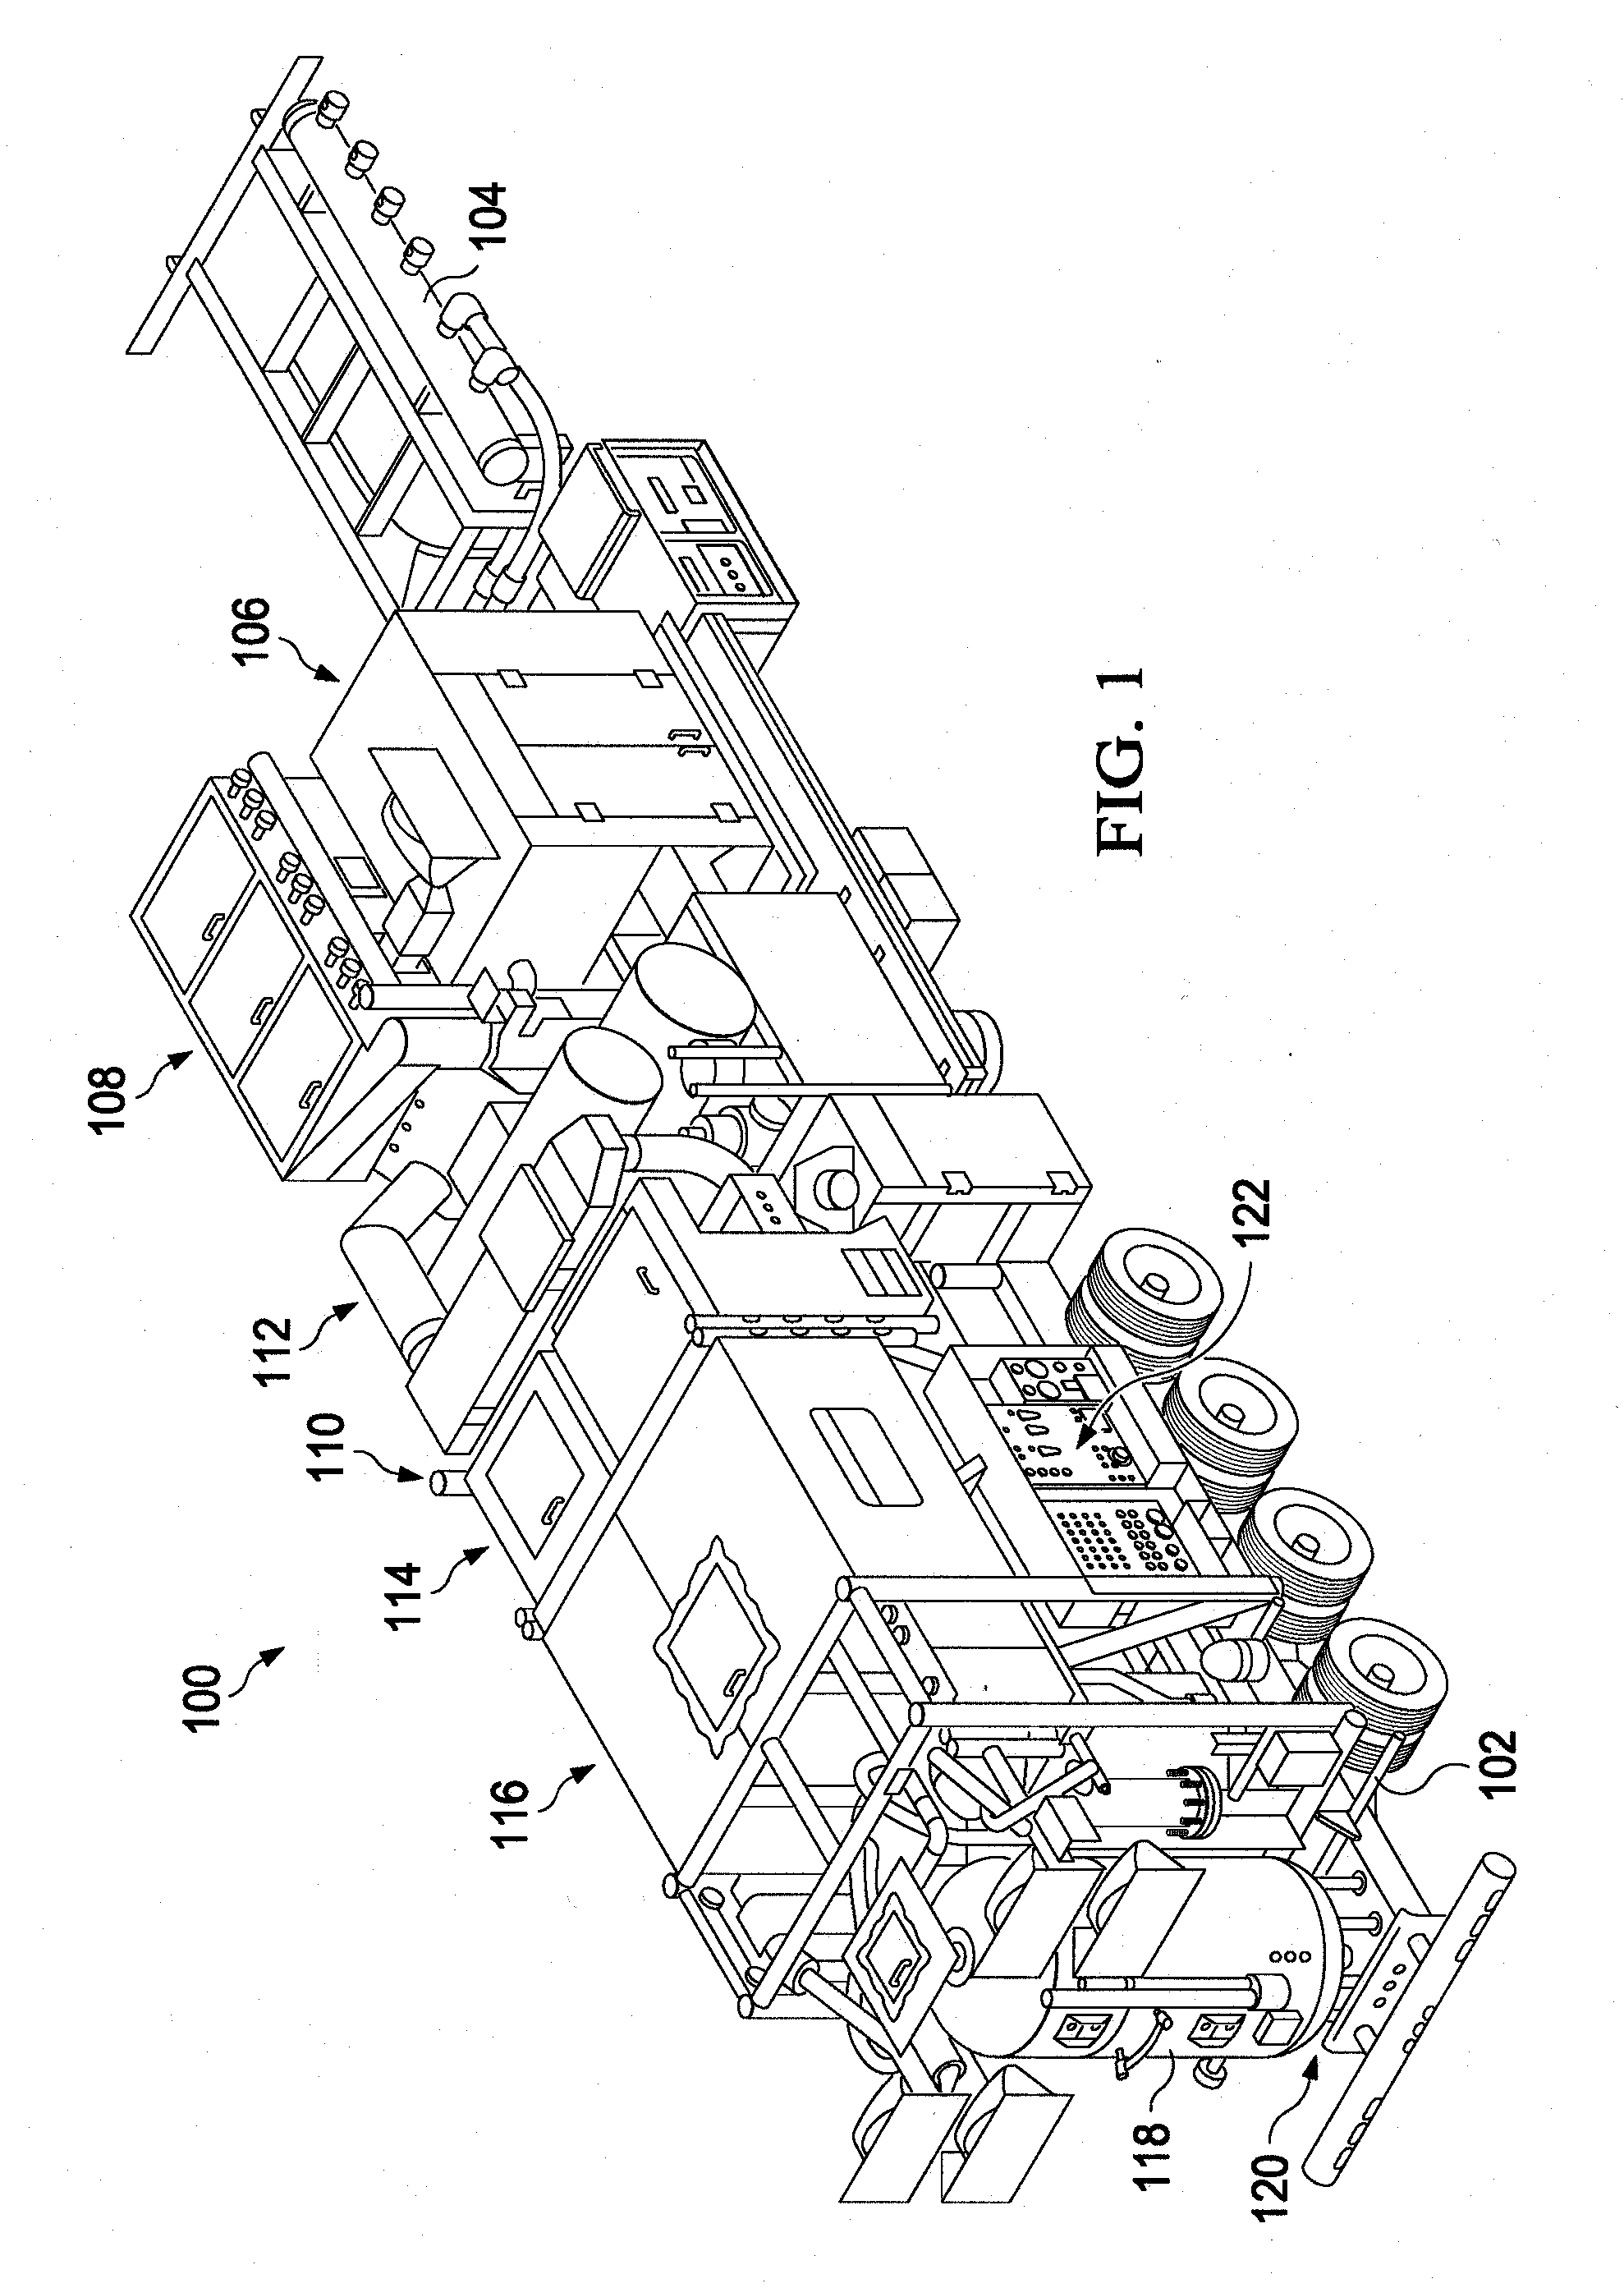 System and method for managing and maintaining abrasive blasting machines